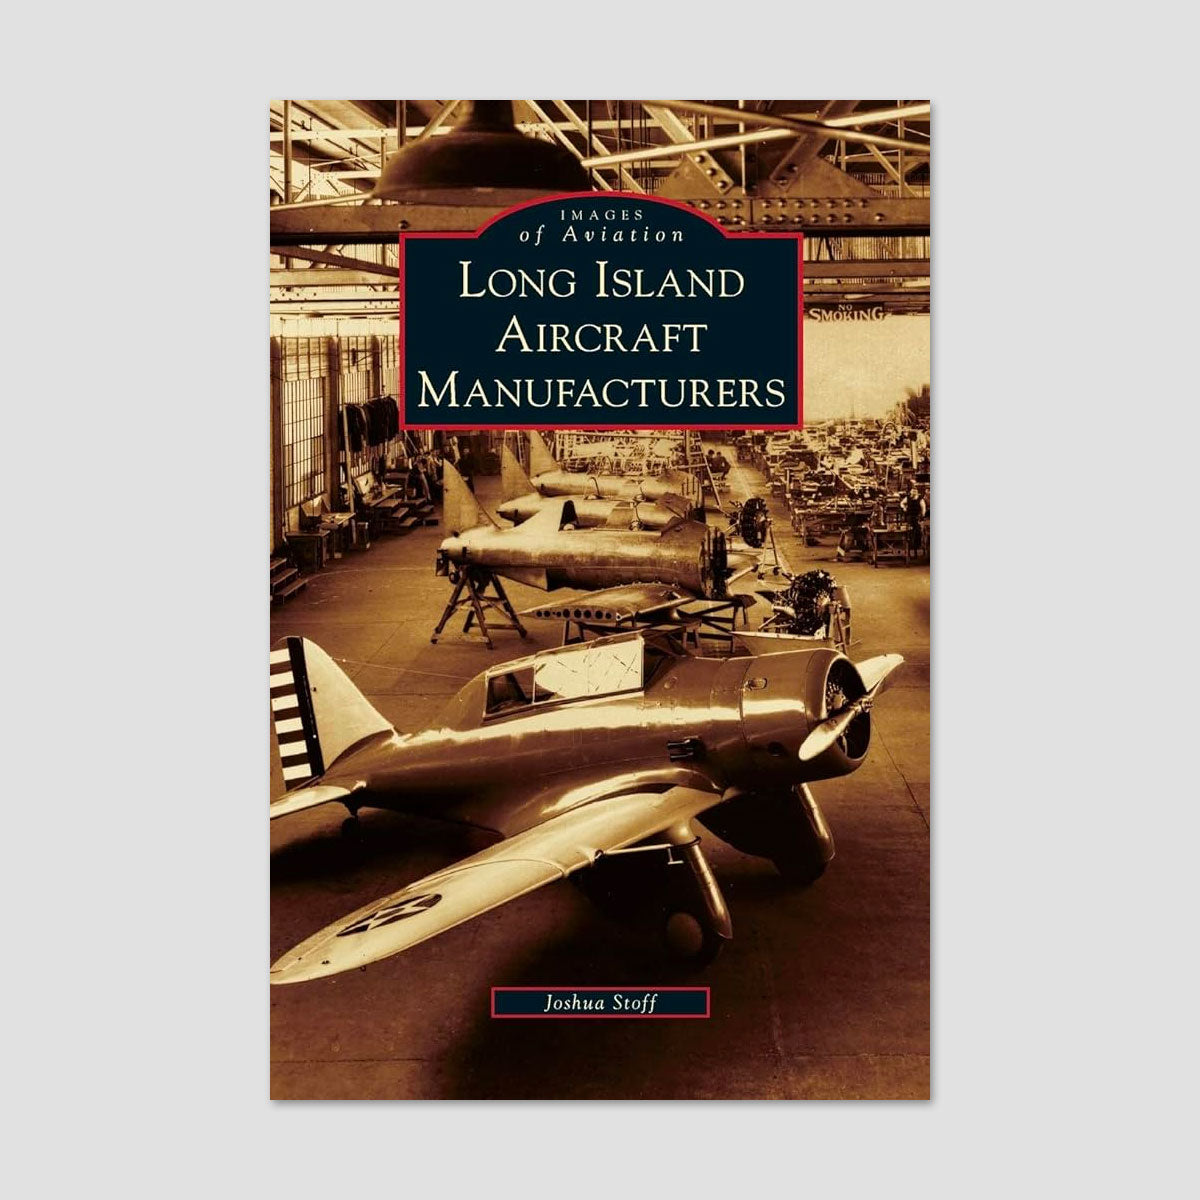 SIGNED Copy! Long Island Aircraft Manufacturers